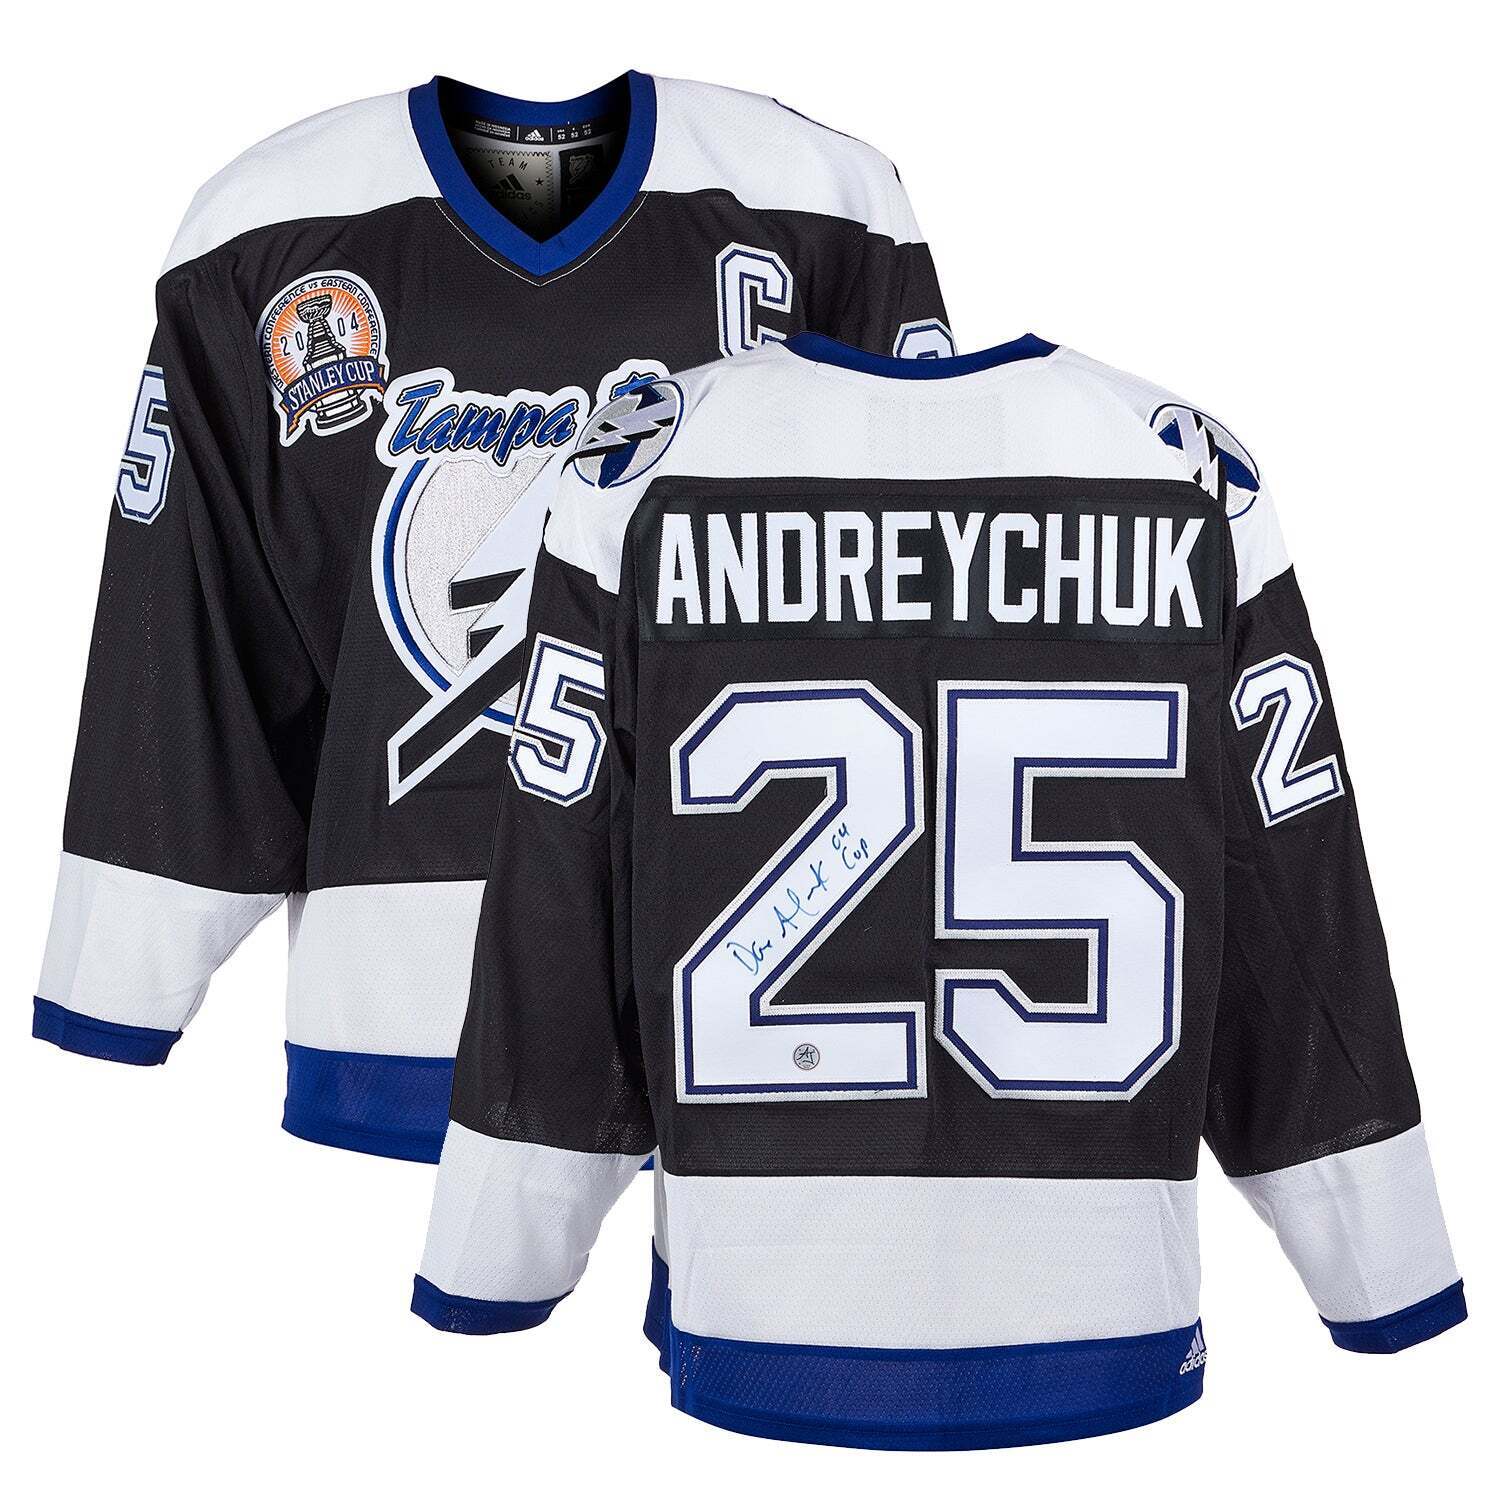 Dave Andreychuk Signed Tampa Bay Lightning 2004 Cup Adidas Jersey